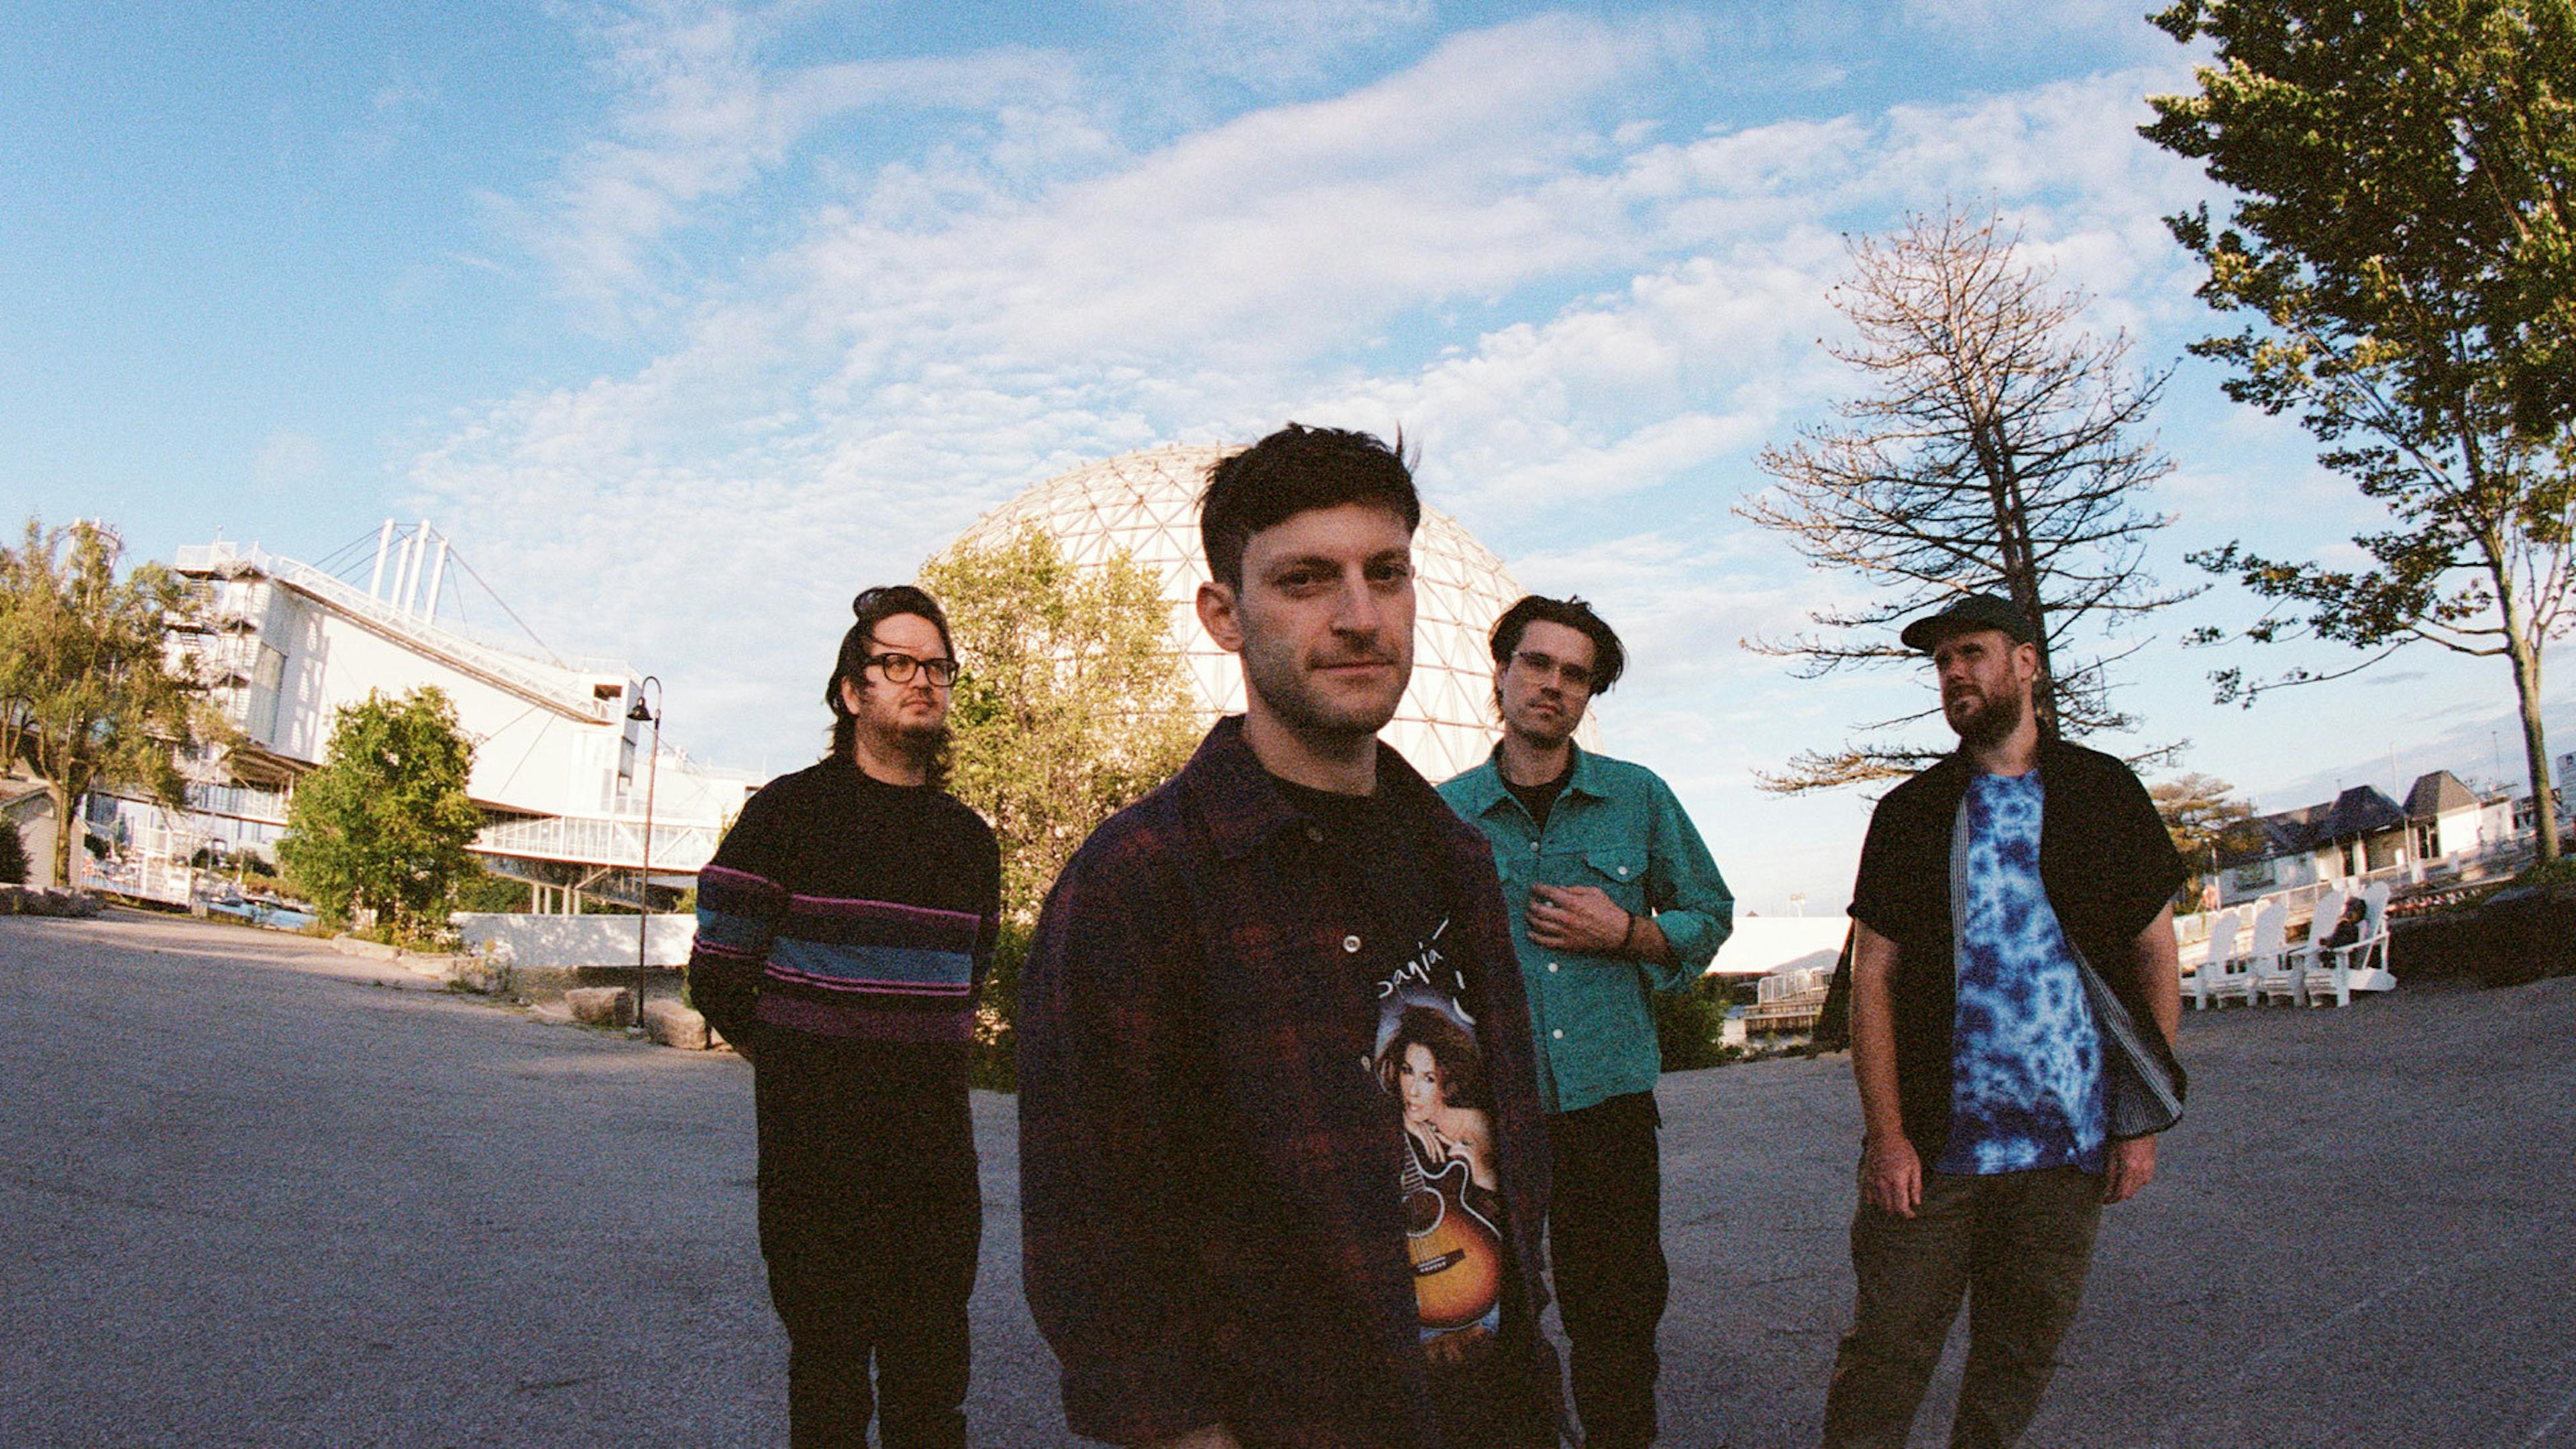 PUP drop Robot Writes A Love Song; announce new album The Unraveling Of PUPTHEBAND